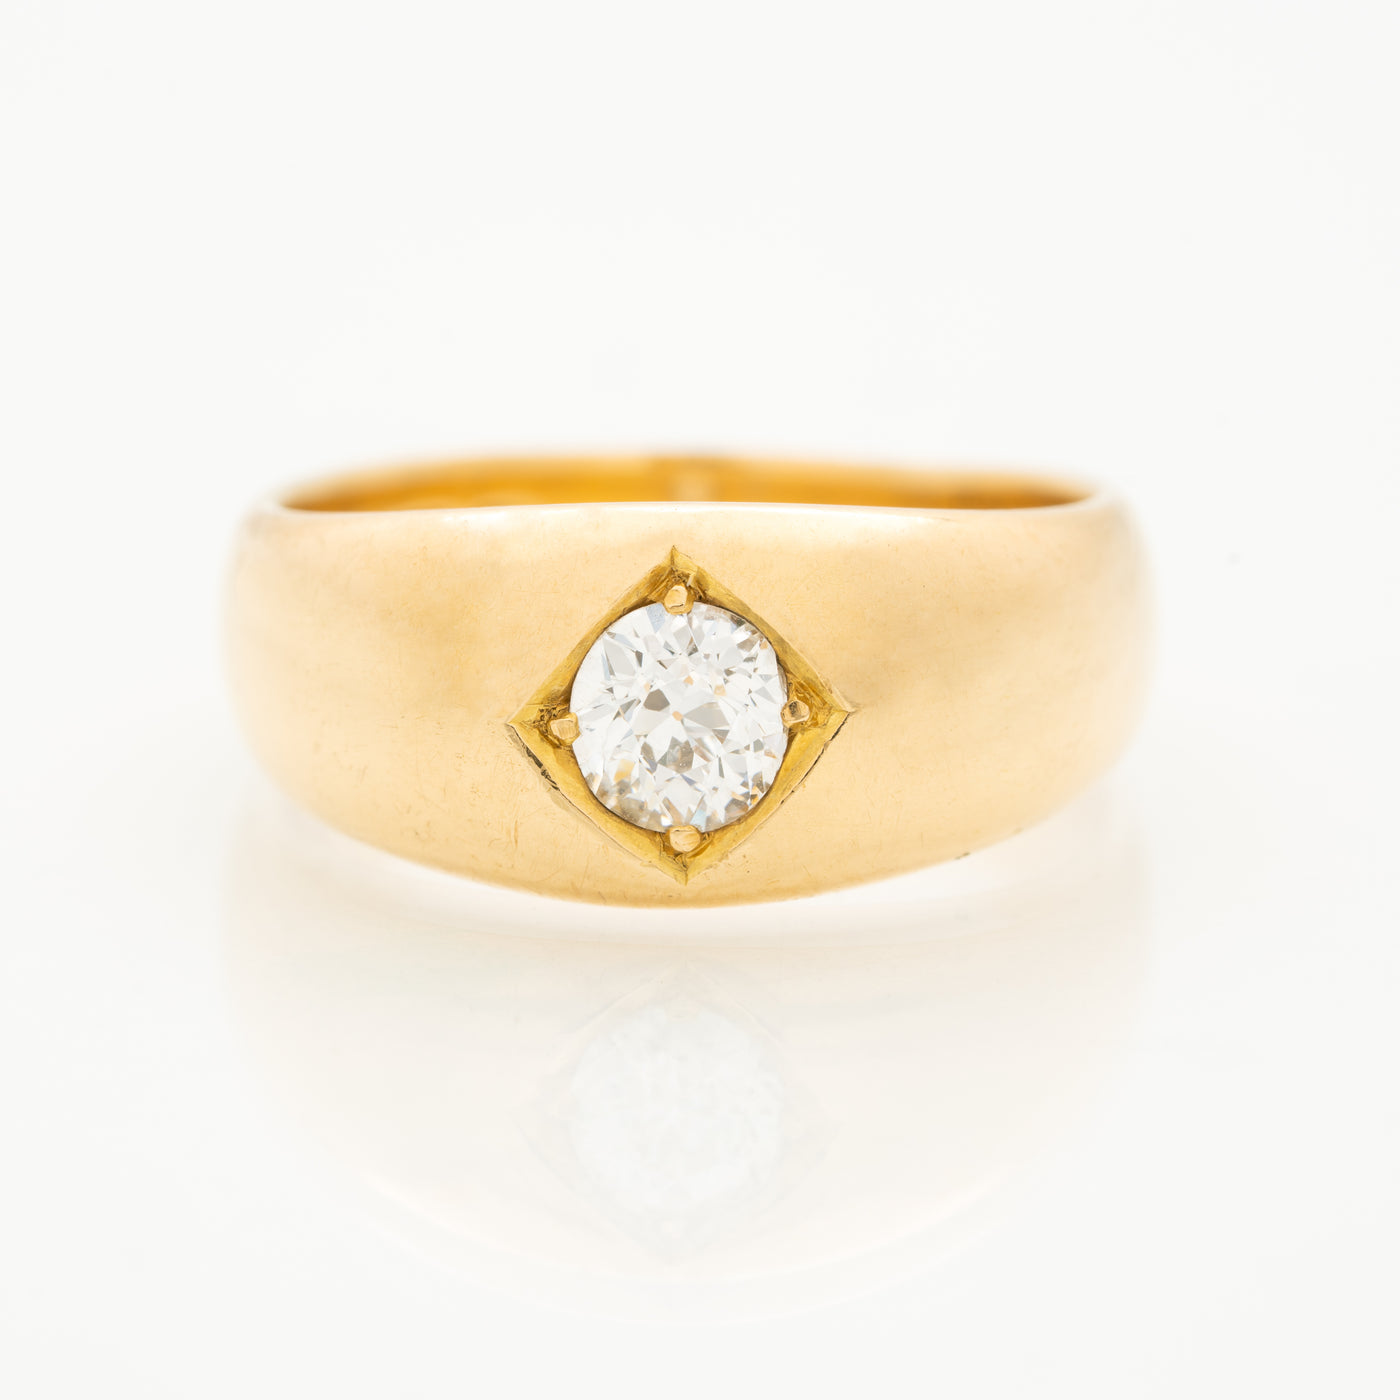 VICTORIAN 18K YELLOW GOLD AND 0.65CTS. OLD EUROPEAN CUT DIAMOND GYPSY RING c.1900